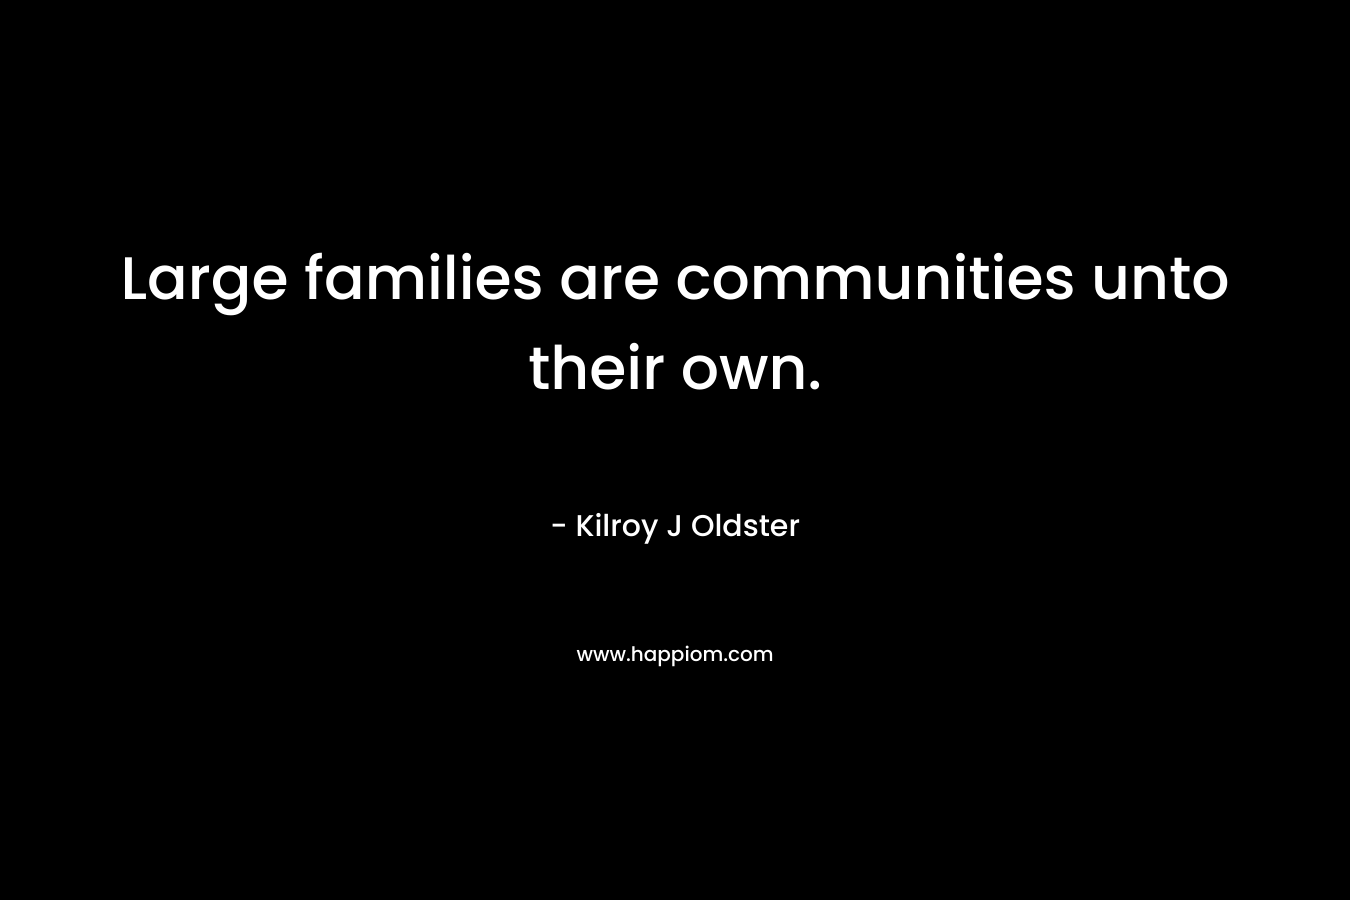 Large families are communities unto their own.